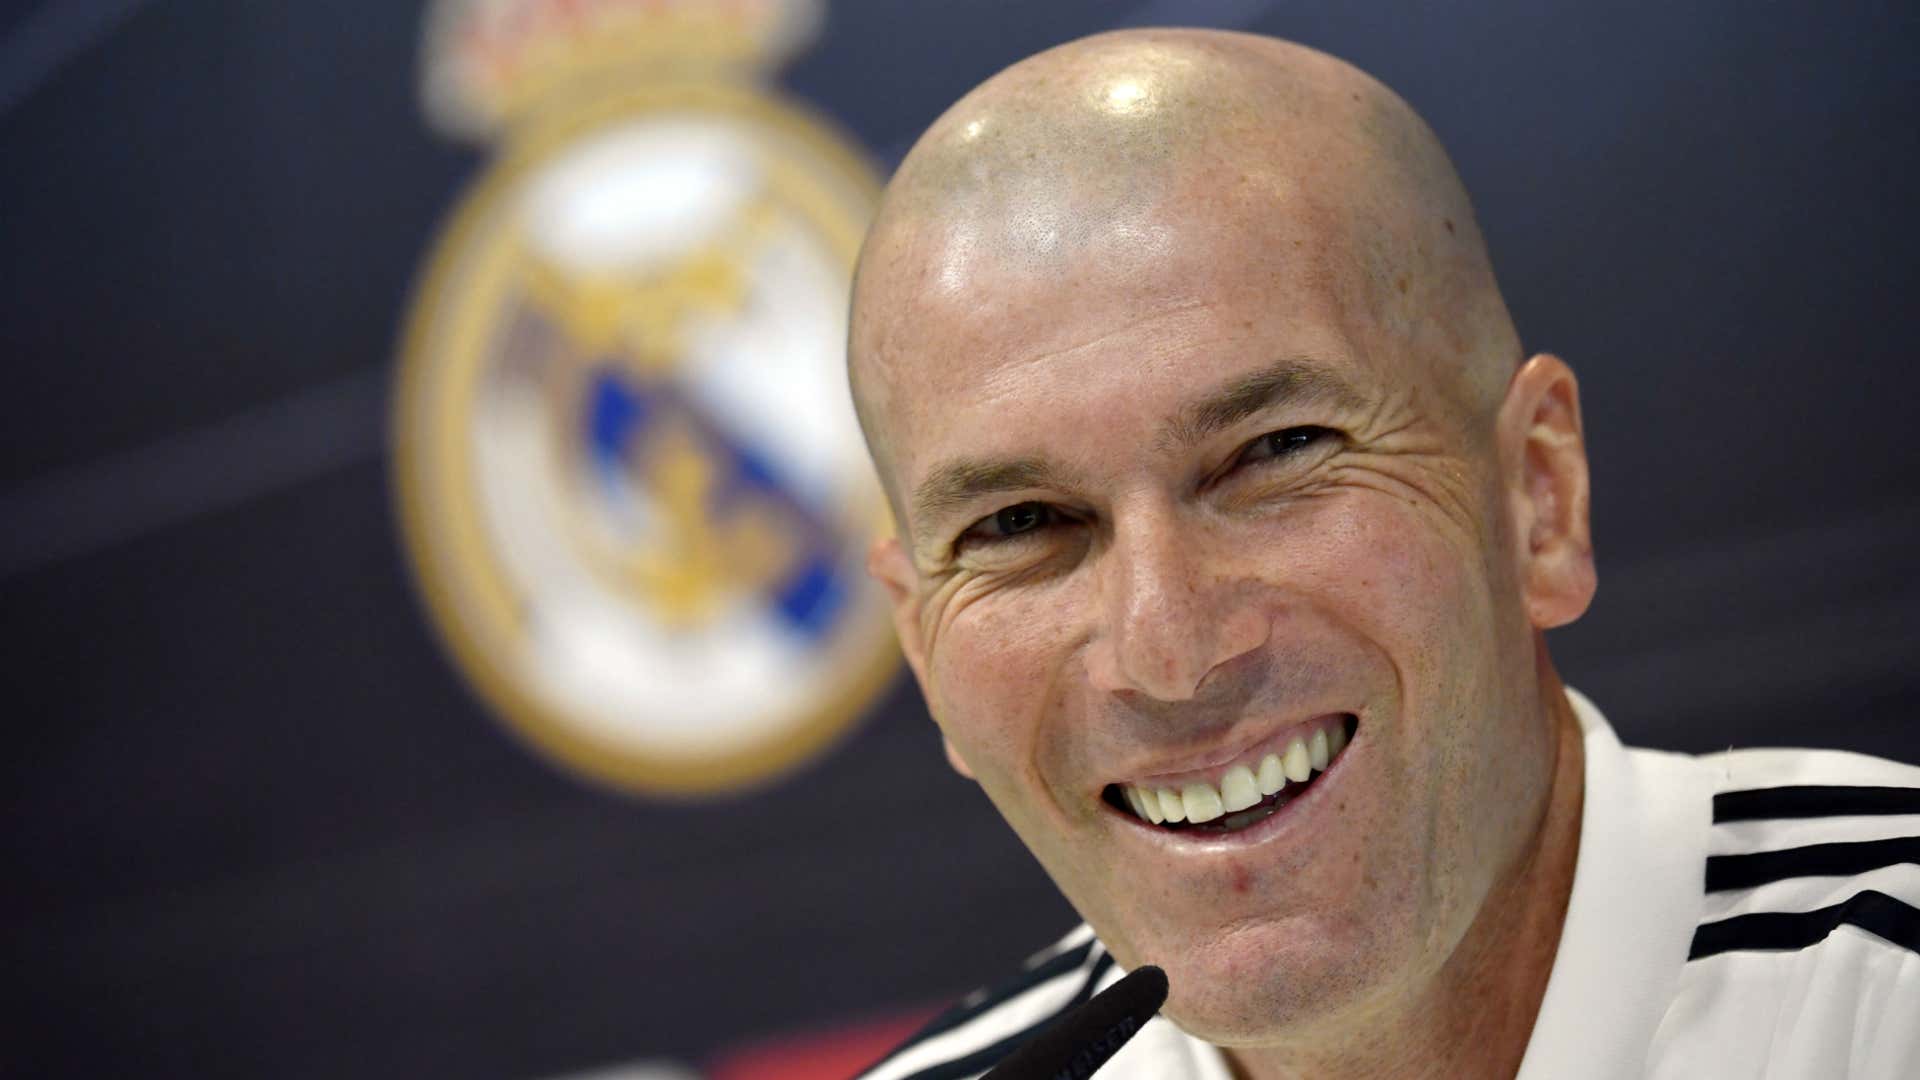 Zidane, Real Madrid coach, in press conference